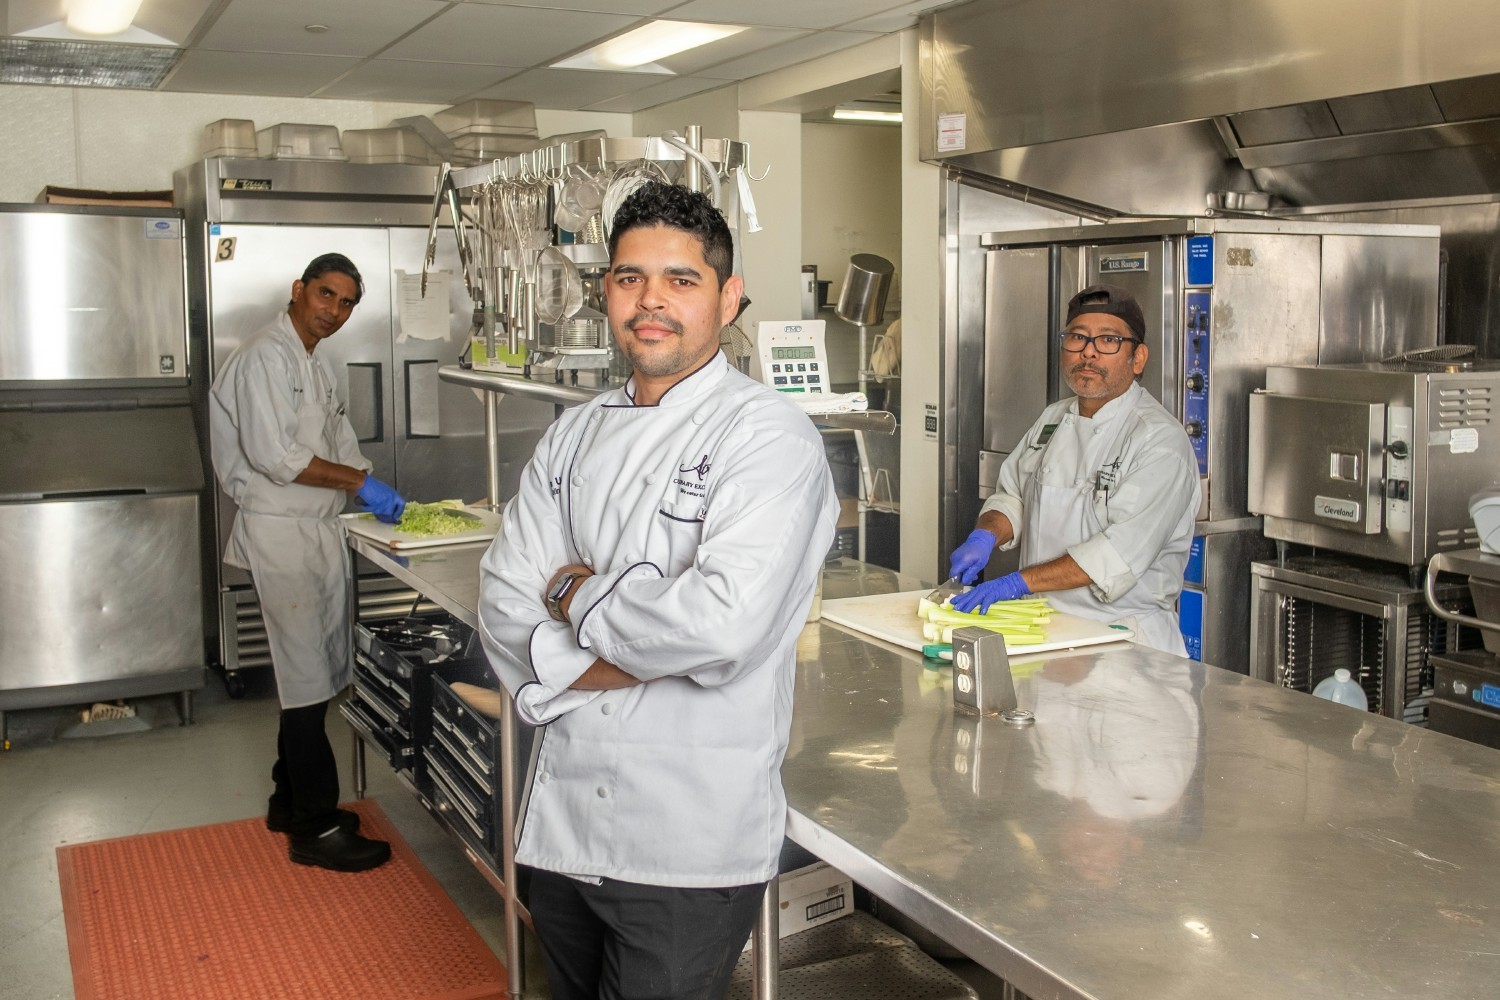 Adrian, a member of the Culinary Team at Atria Rye Brook, poses in the community kitchen.